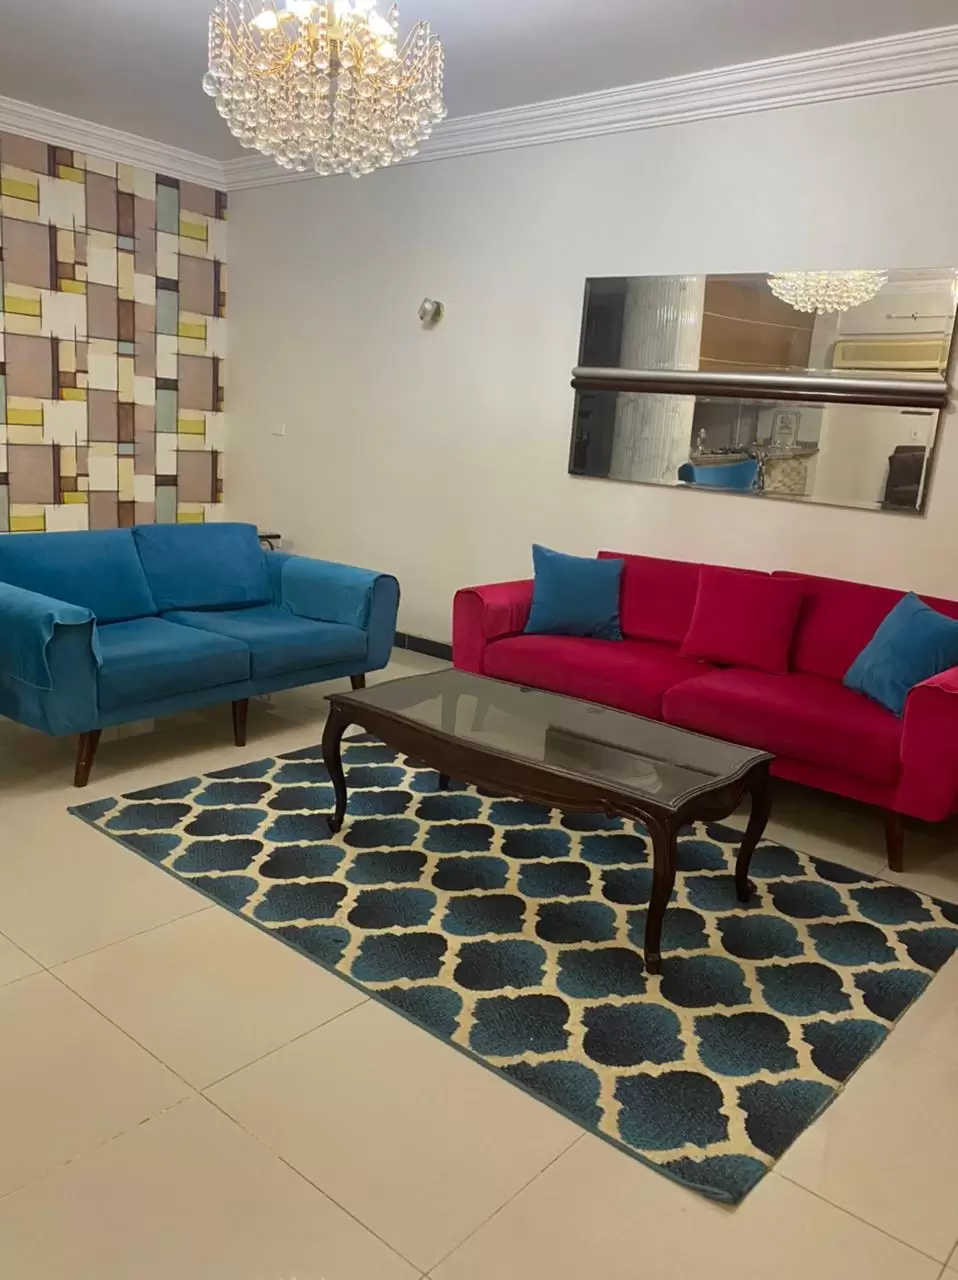 Fully furnished apartment with A. C. in  Sheikh Zayed city,one floor of a Villa, in front of Wise International School, 230 square meters 2 bedrooms, Reception 3peices, 2bathrooms,